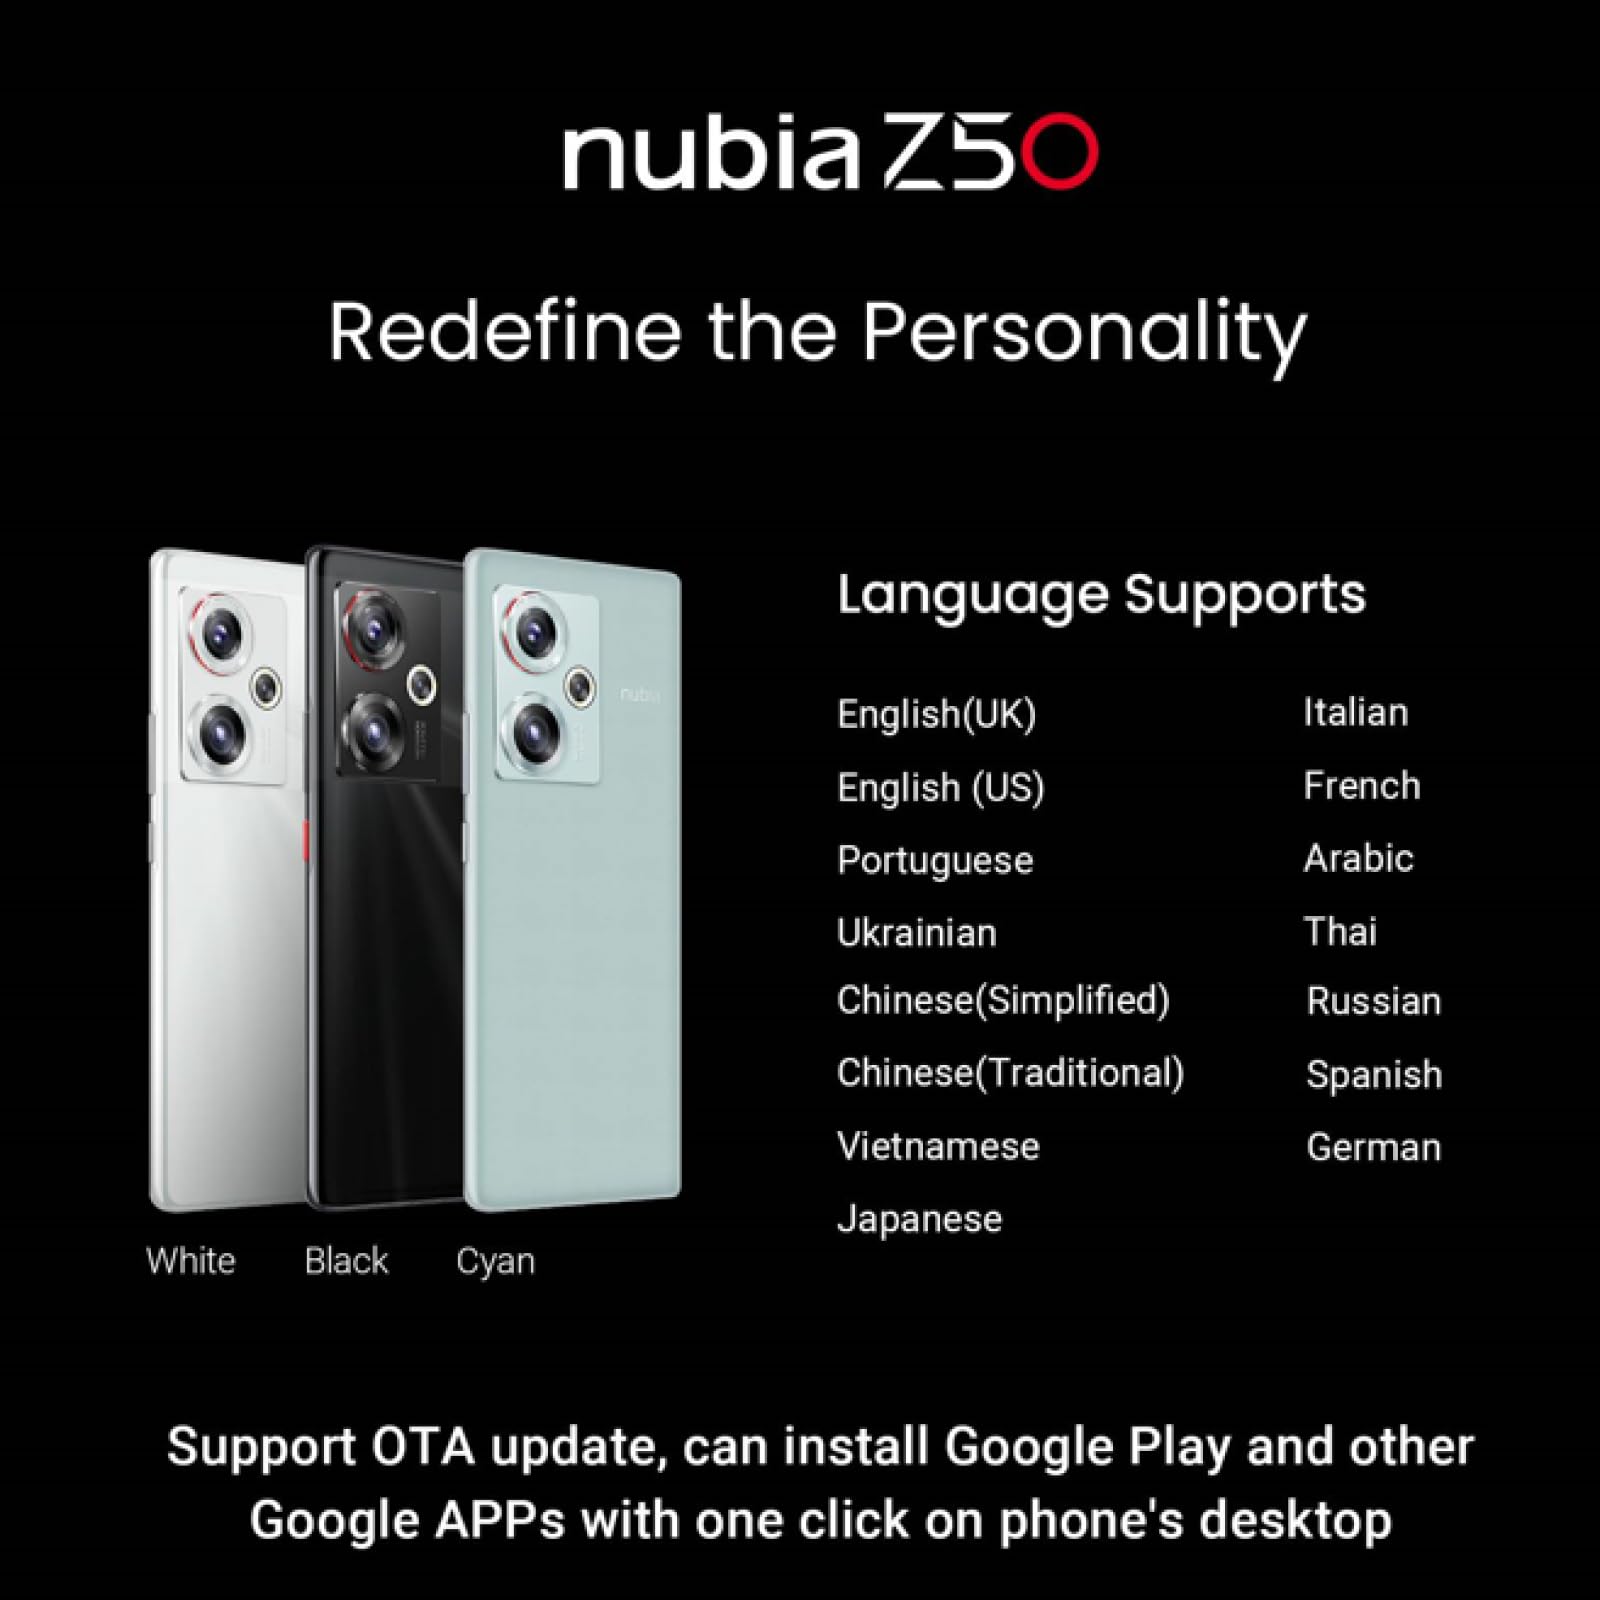 nubia Z50 Redmagic Cellphone - 5G Unlocked Android Phone, 64MP+50MP Dual Camera, Qualcomm Snapdragon 8 Gen 2, 144Hz 6.67” AMOLED Screen, 80W Quick Charge Android Phone w/ 5000mAh Battery, 12GB, Black